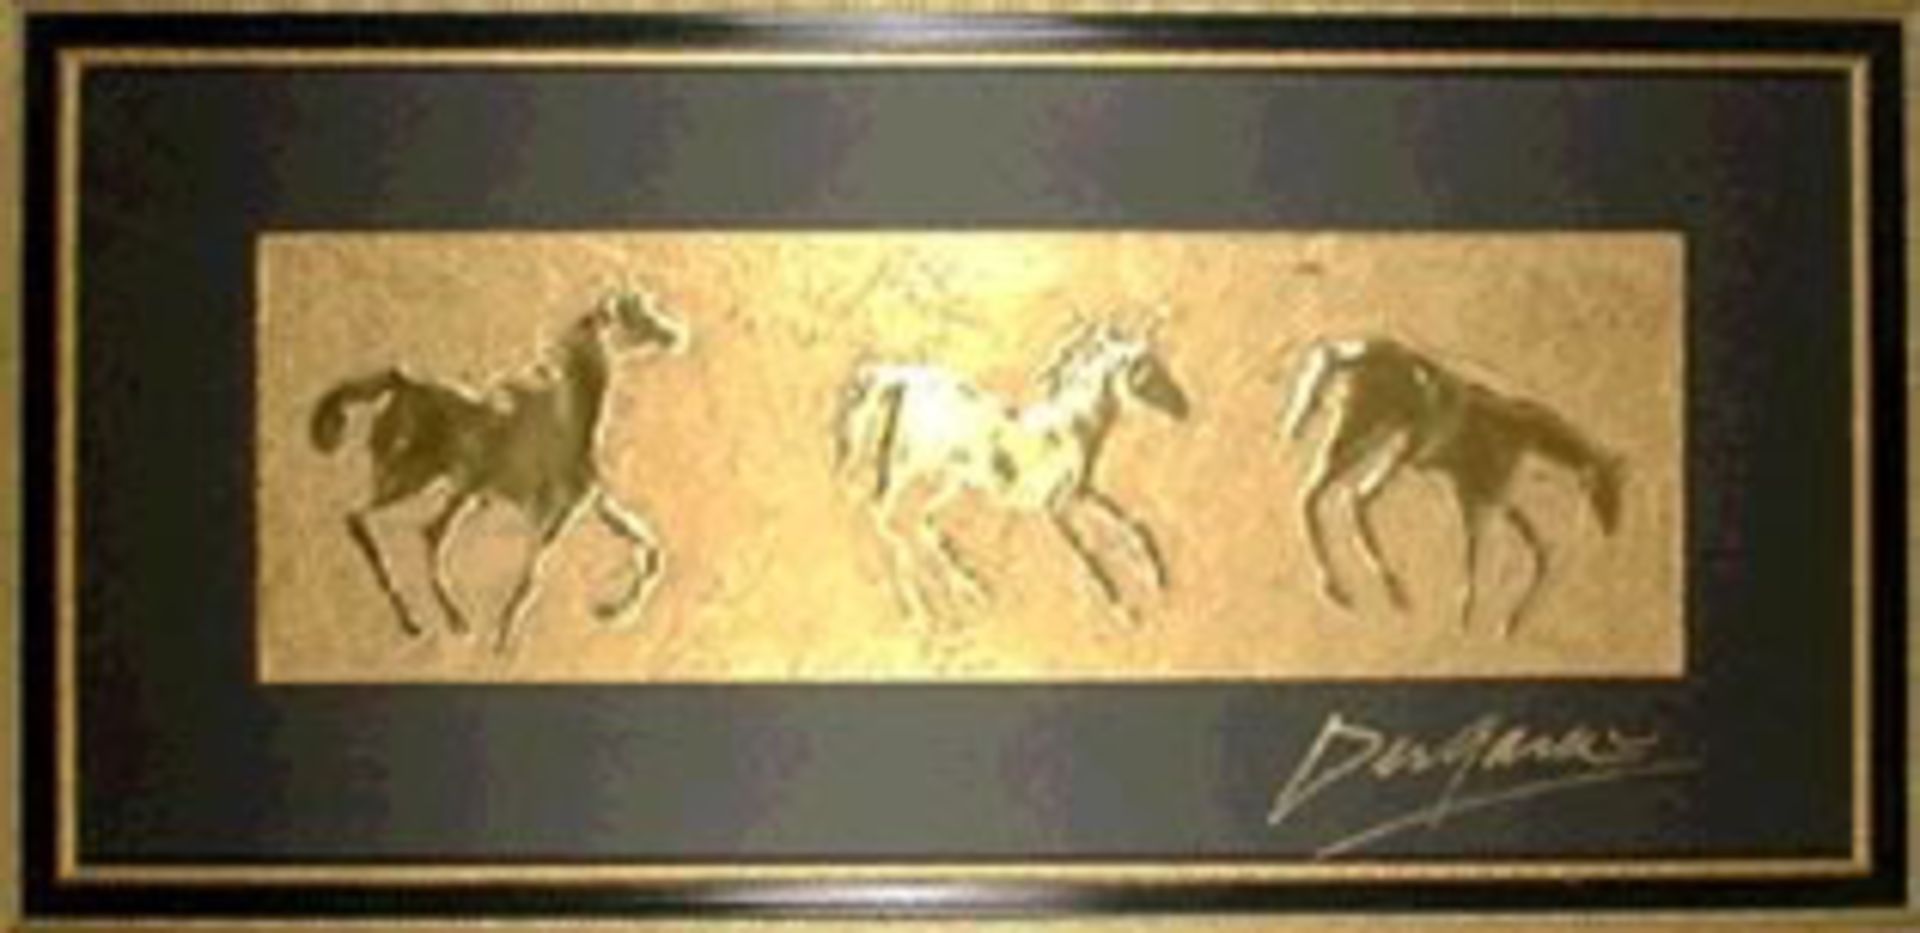 Horses Ann Dergara  Embossed Metal  - Mounted and Framed 105x51cm The enthusiasm with which Ann